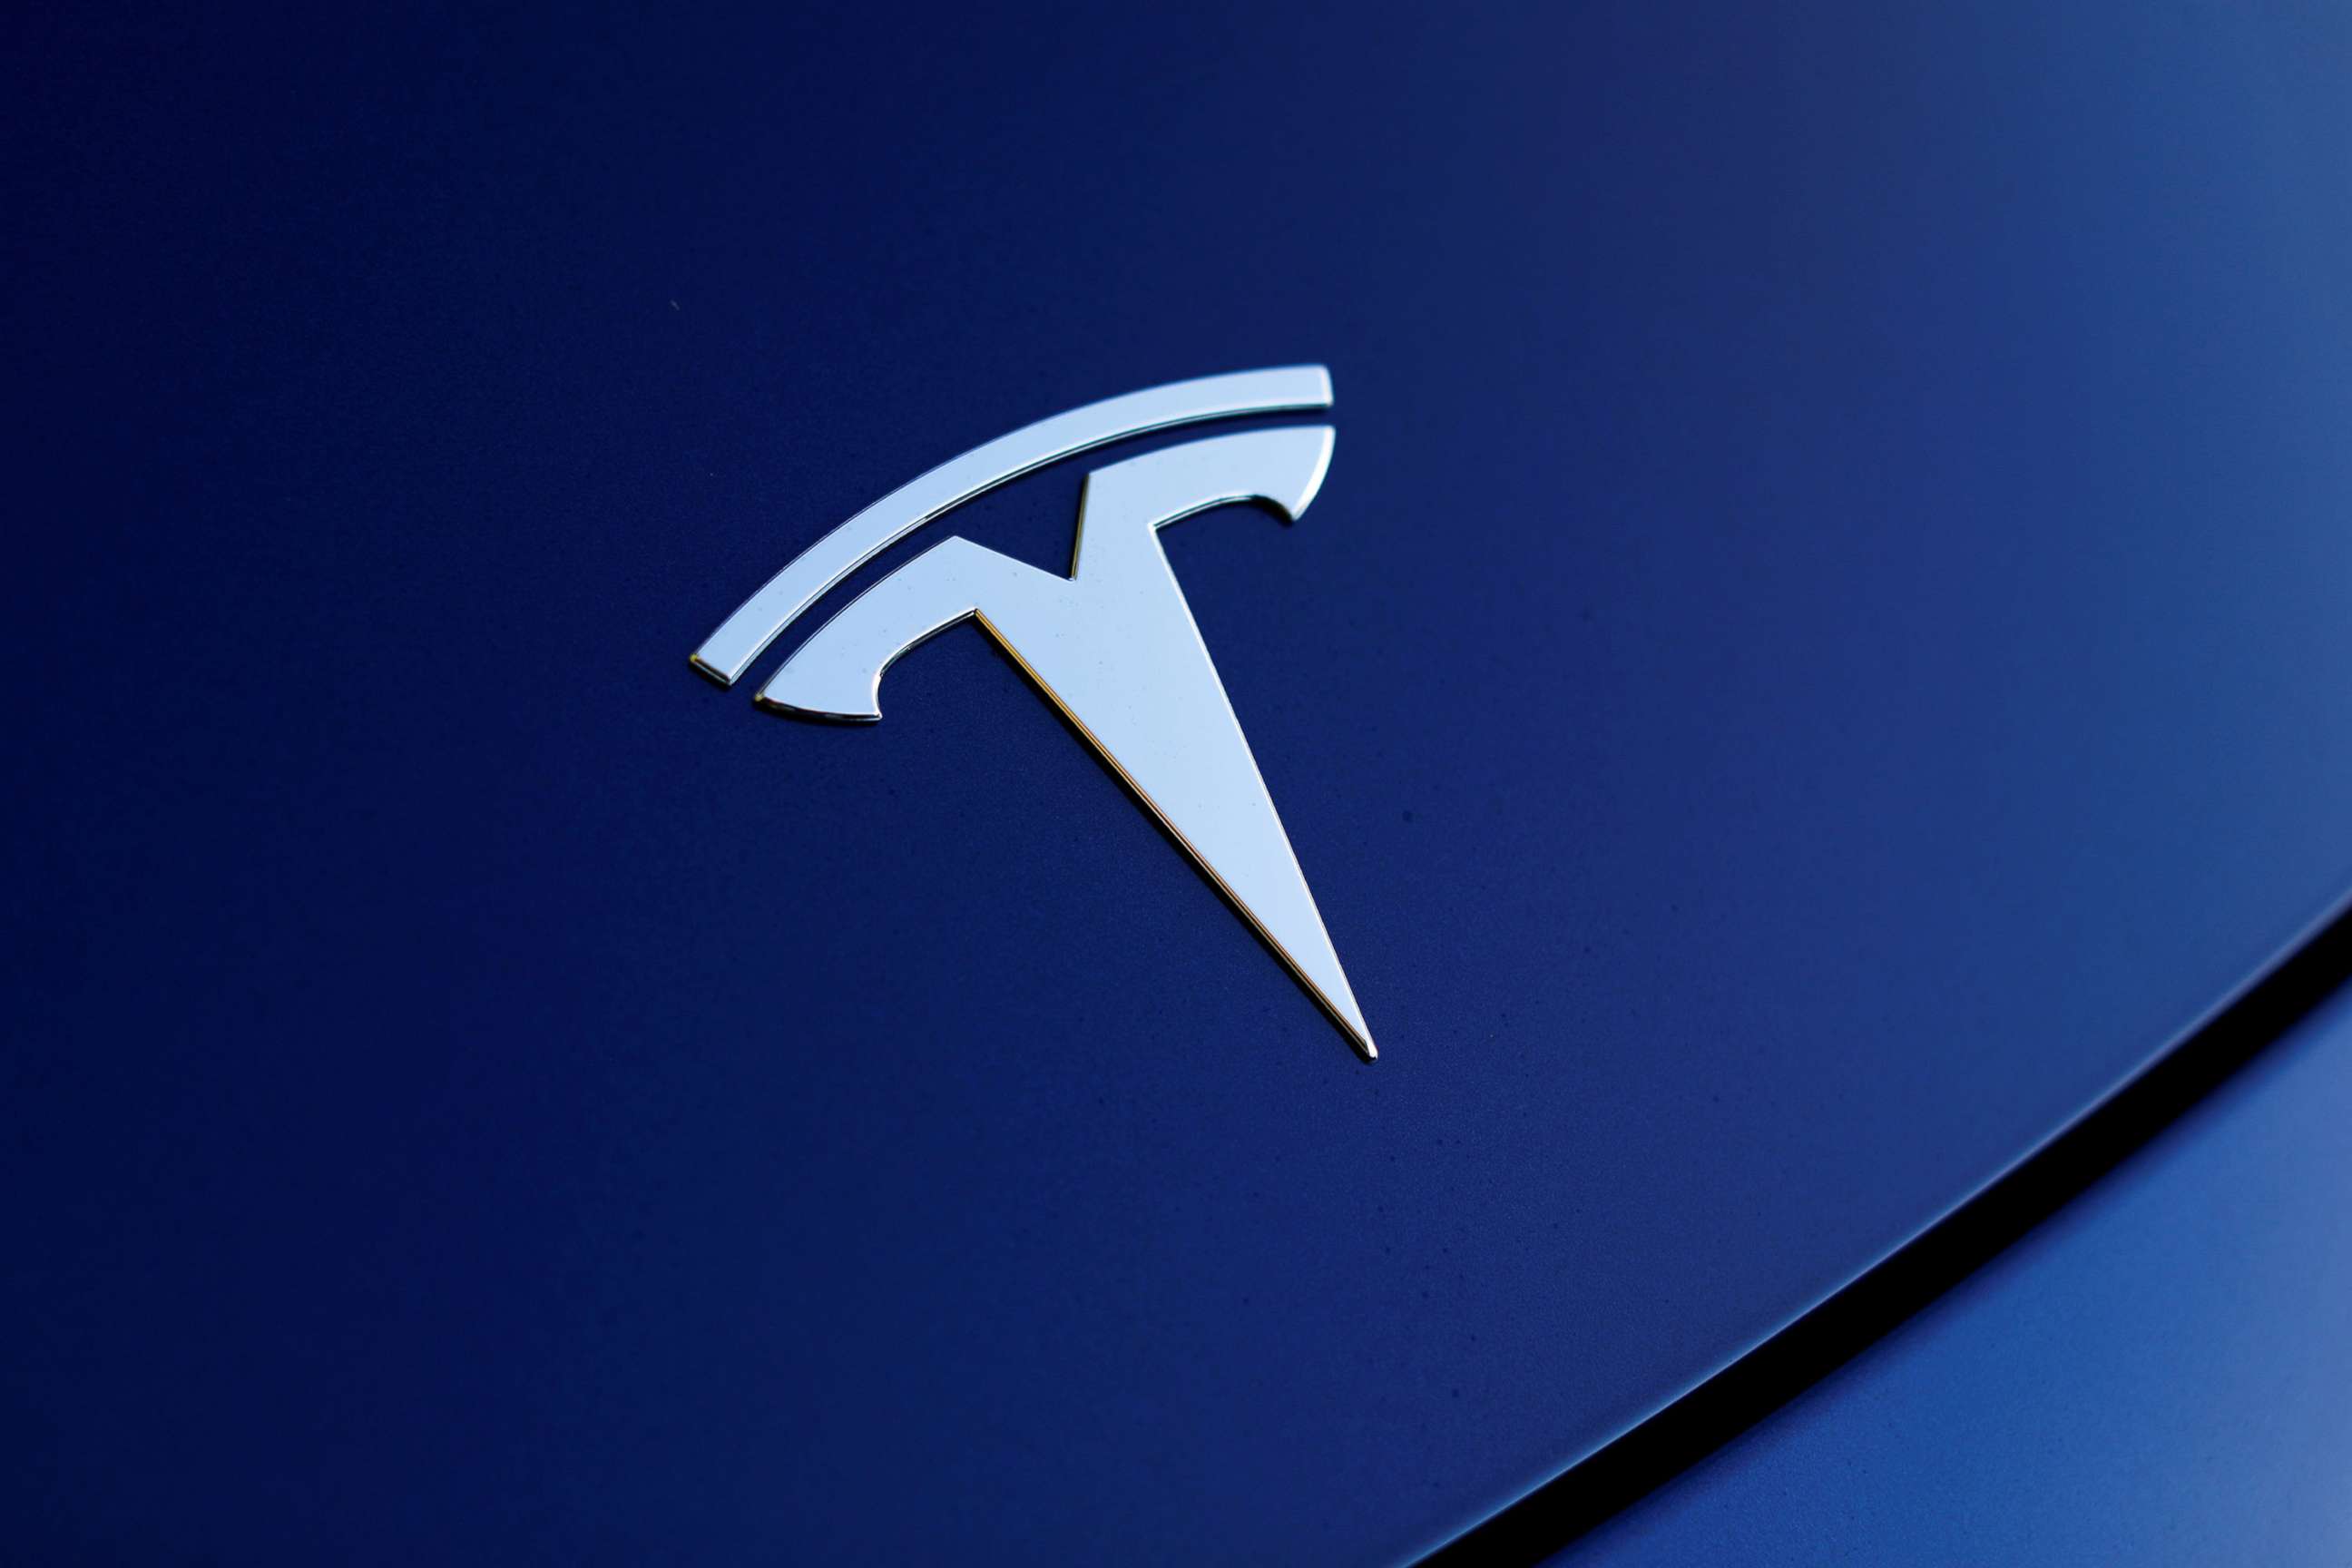 PHOTO: The front hood logo on a 2018 Tesla Model 3 electric vehicle is shown in this photo illustration taken in Cardiff, Calif., June 1, 2018.